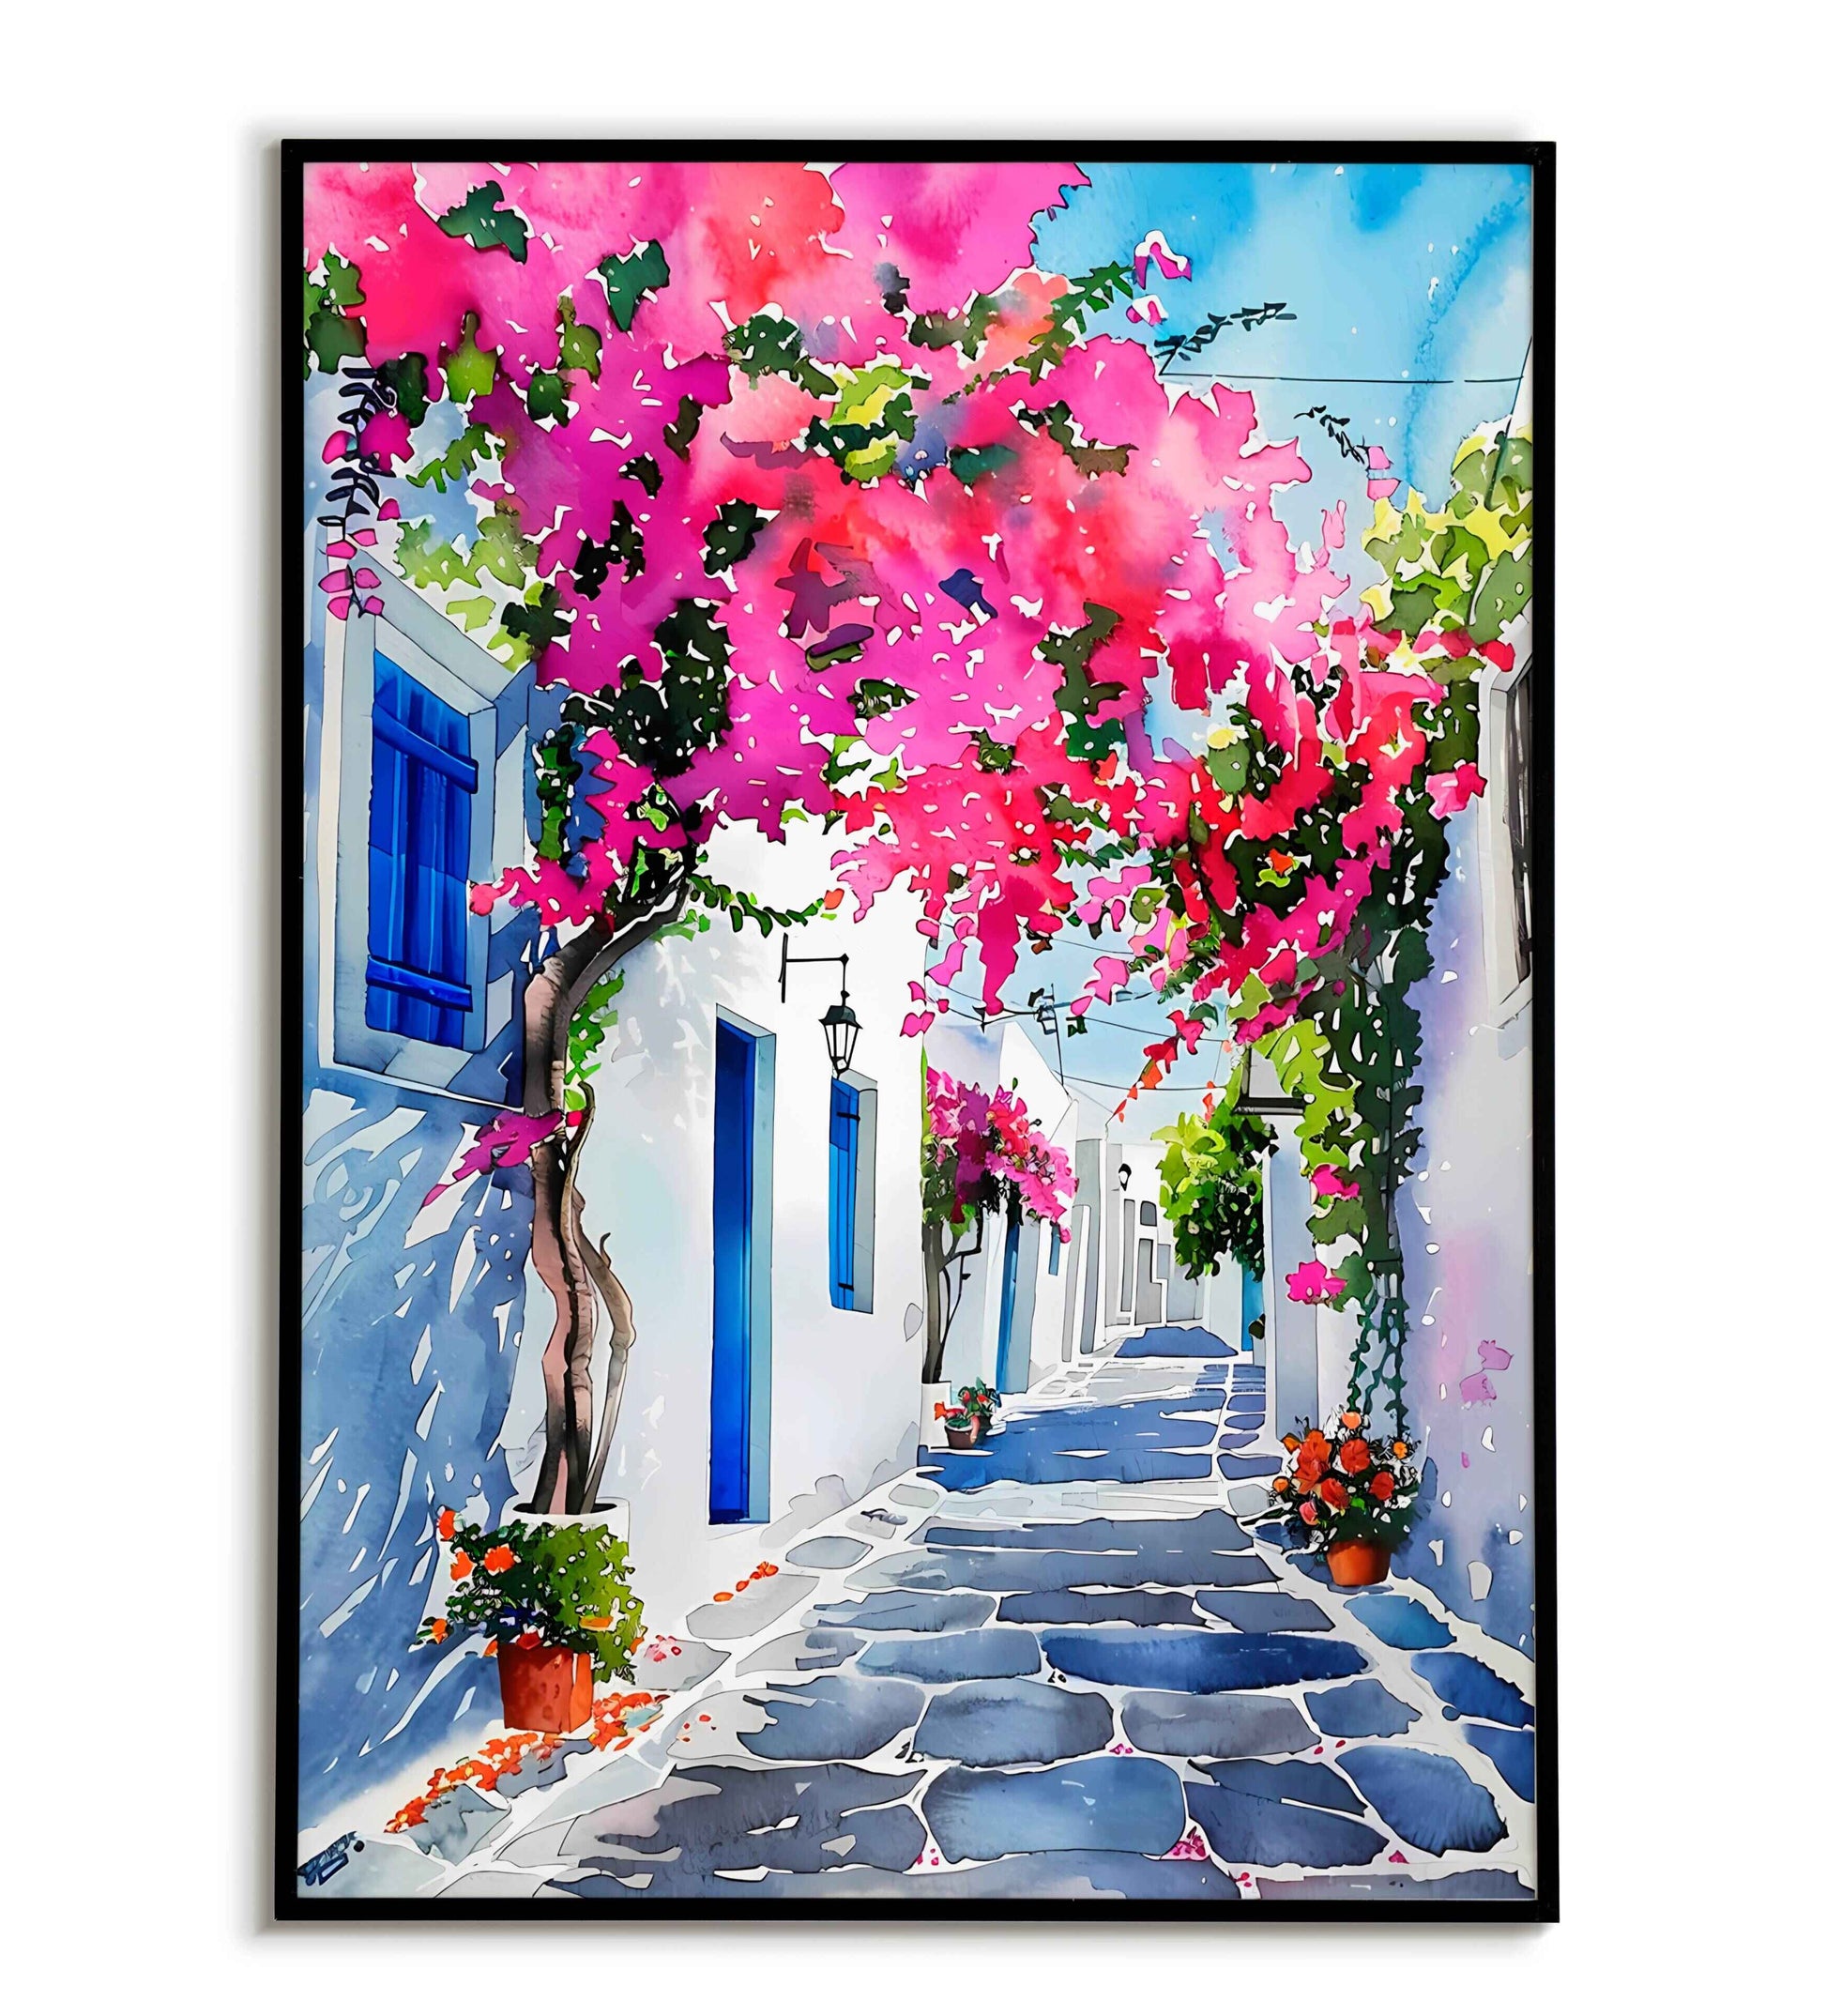 Greek Street travel printable poster. Available for purchase as a physical poster or digital download.